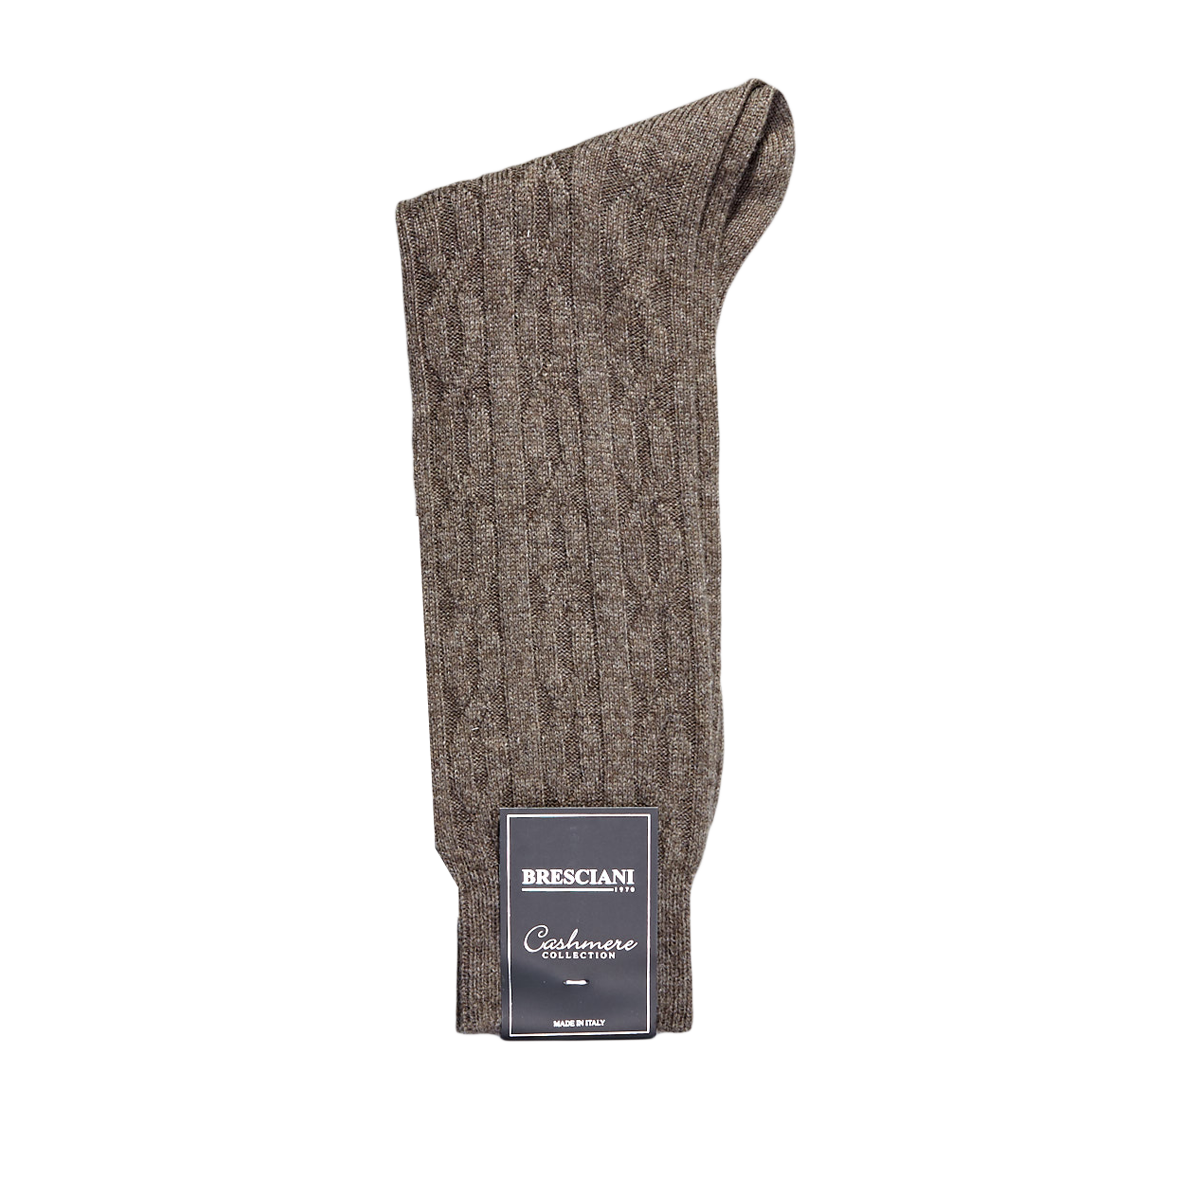 A pair of Brown Cable Knitted Cashmere Socks by Bresciani with a tag on it.